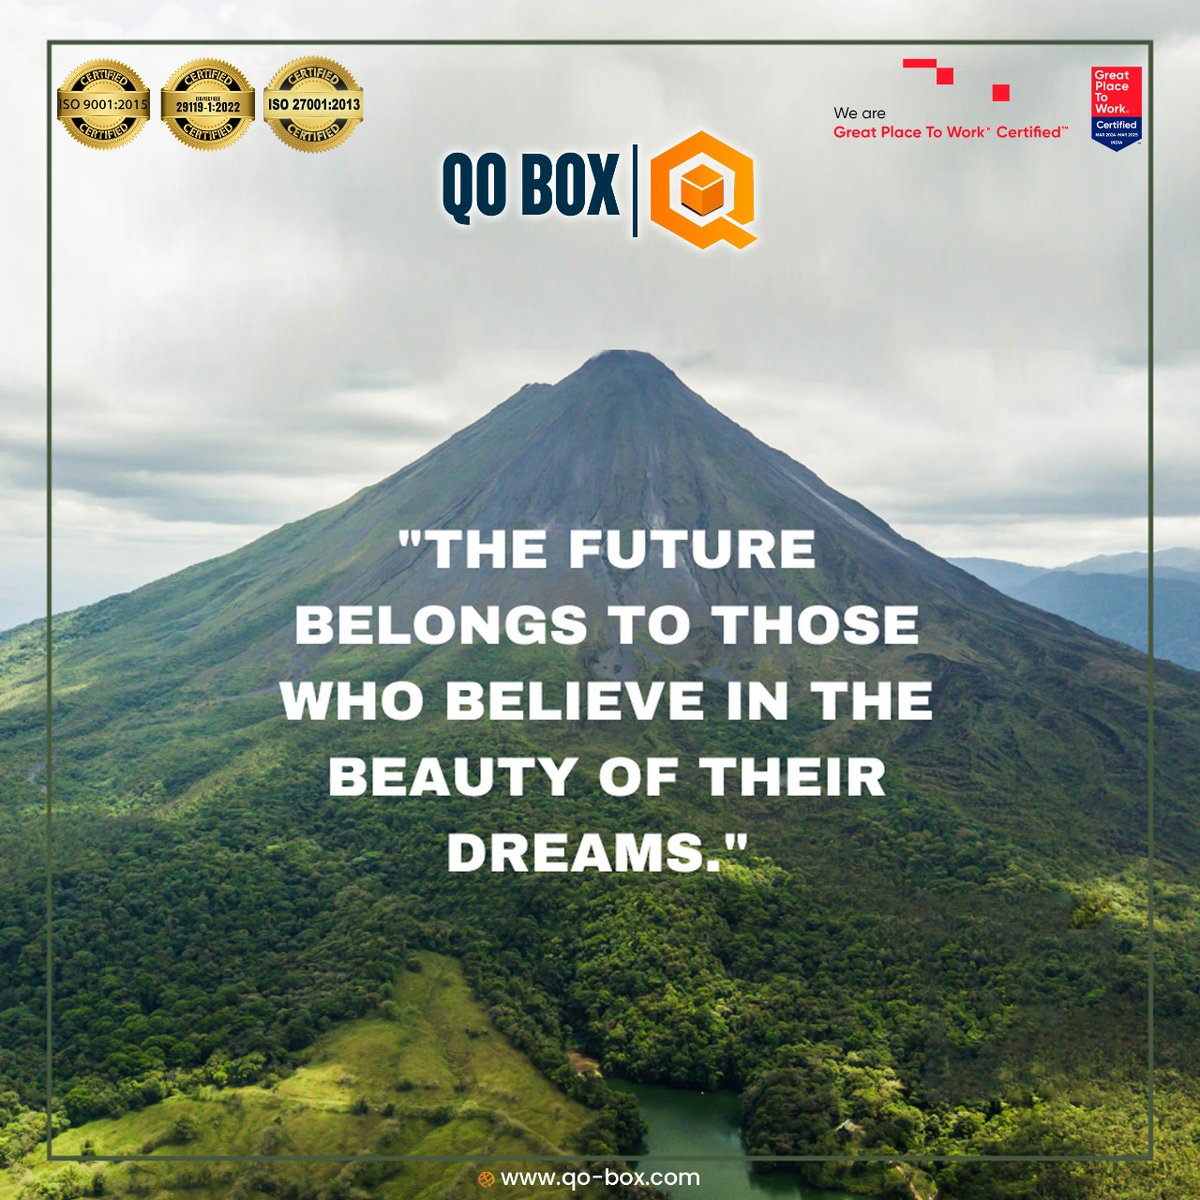 It goes beyond just dreaming. Believing in the beauty of your dreams pushes you to take action and turn them into goals. #qobox #dreambig #futureleader